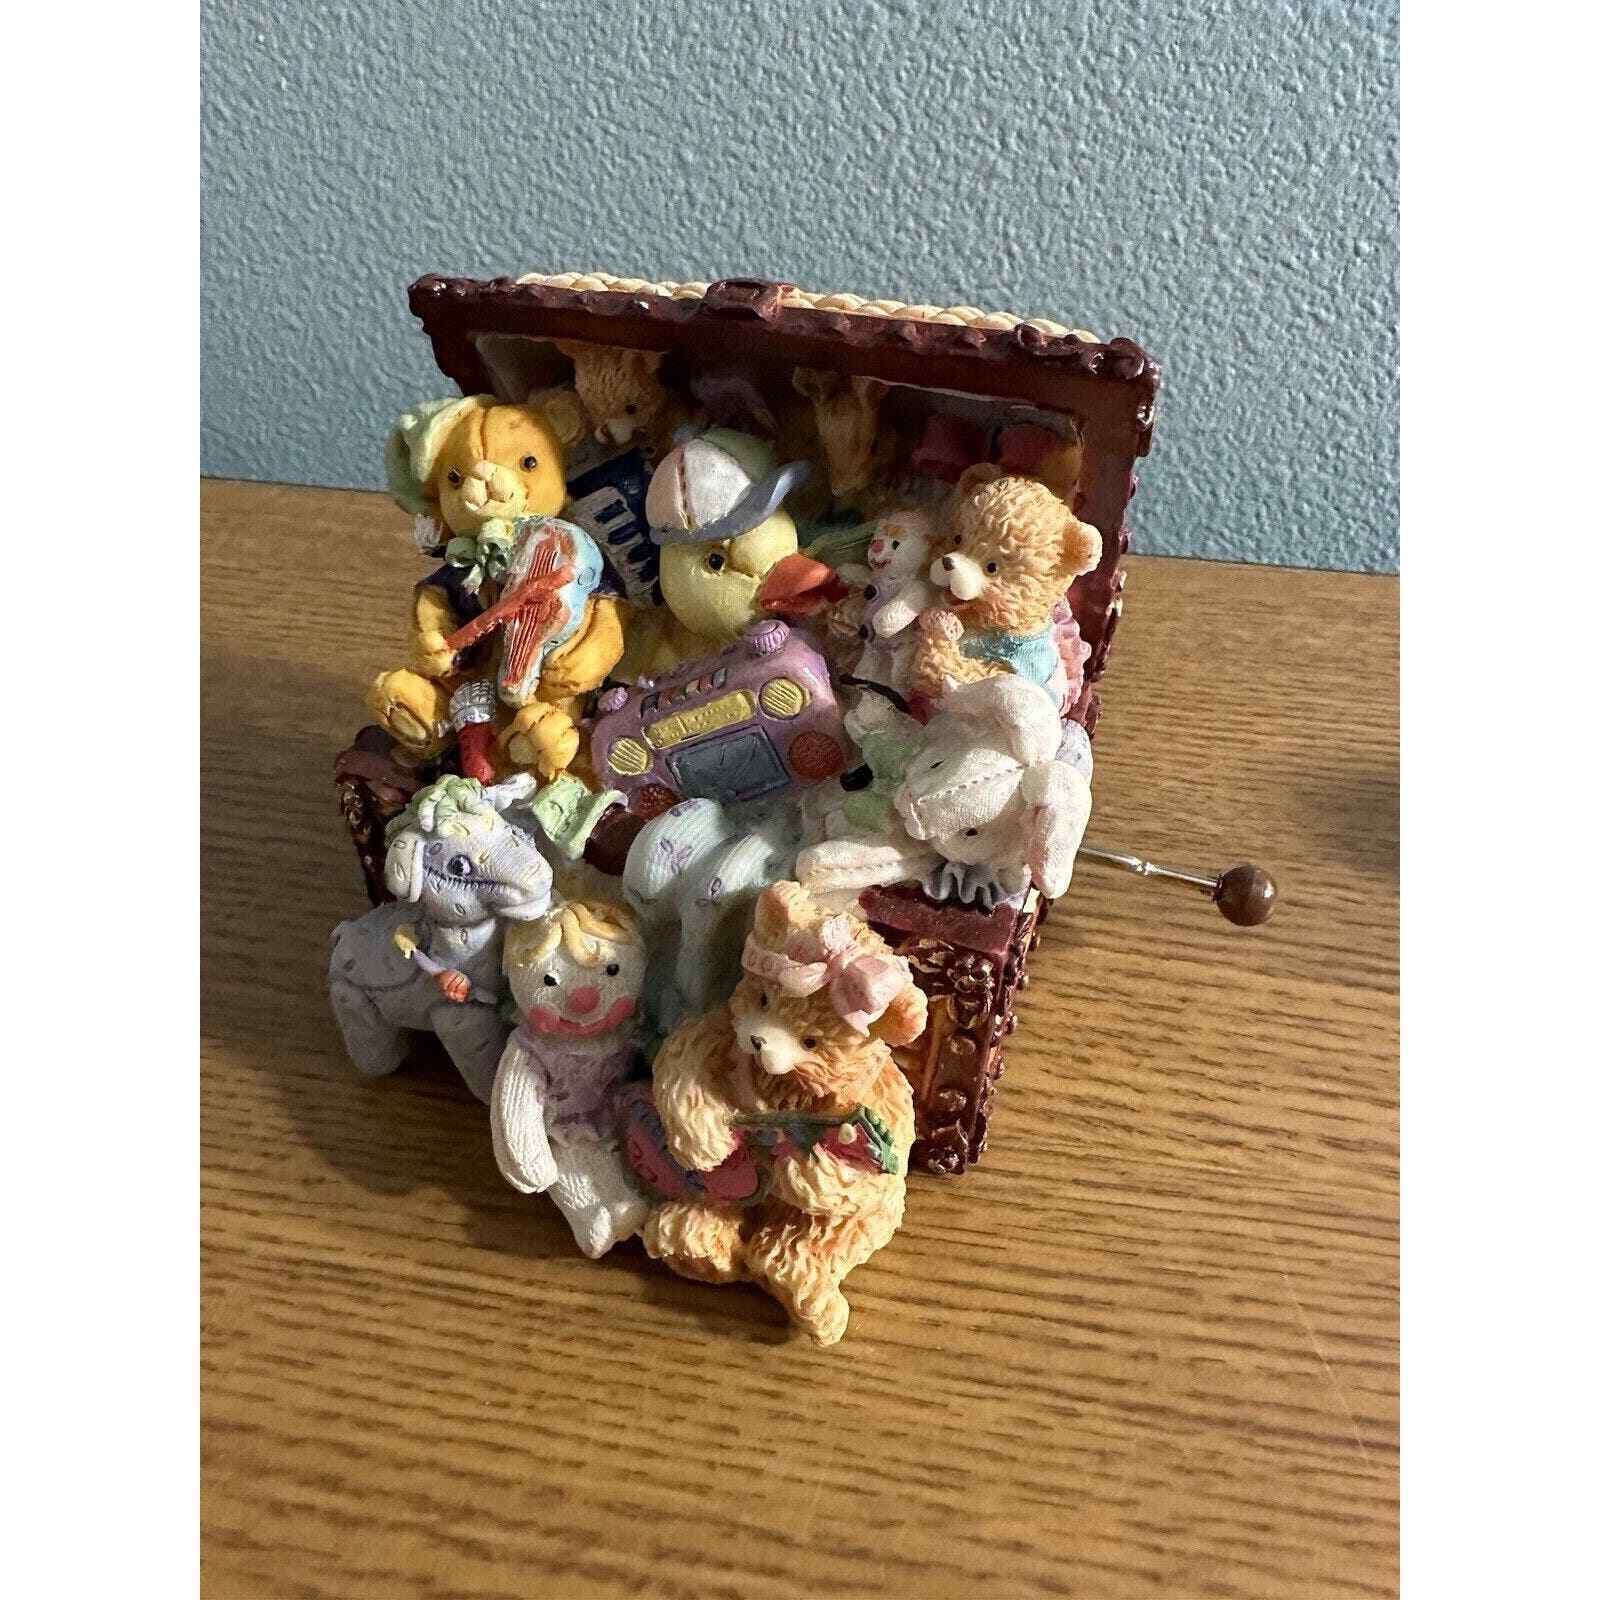 Vintage Wind Up Music Box Toy Box Of Toys By Delton Corp Works